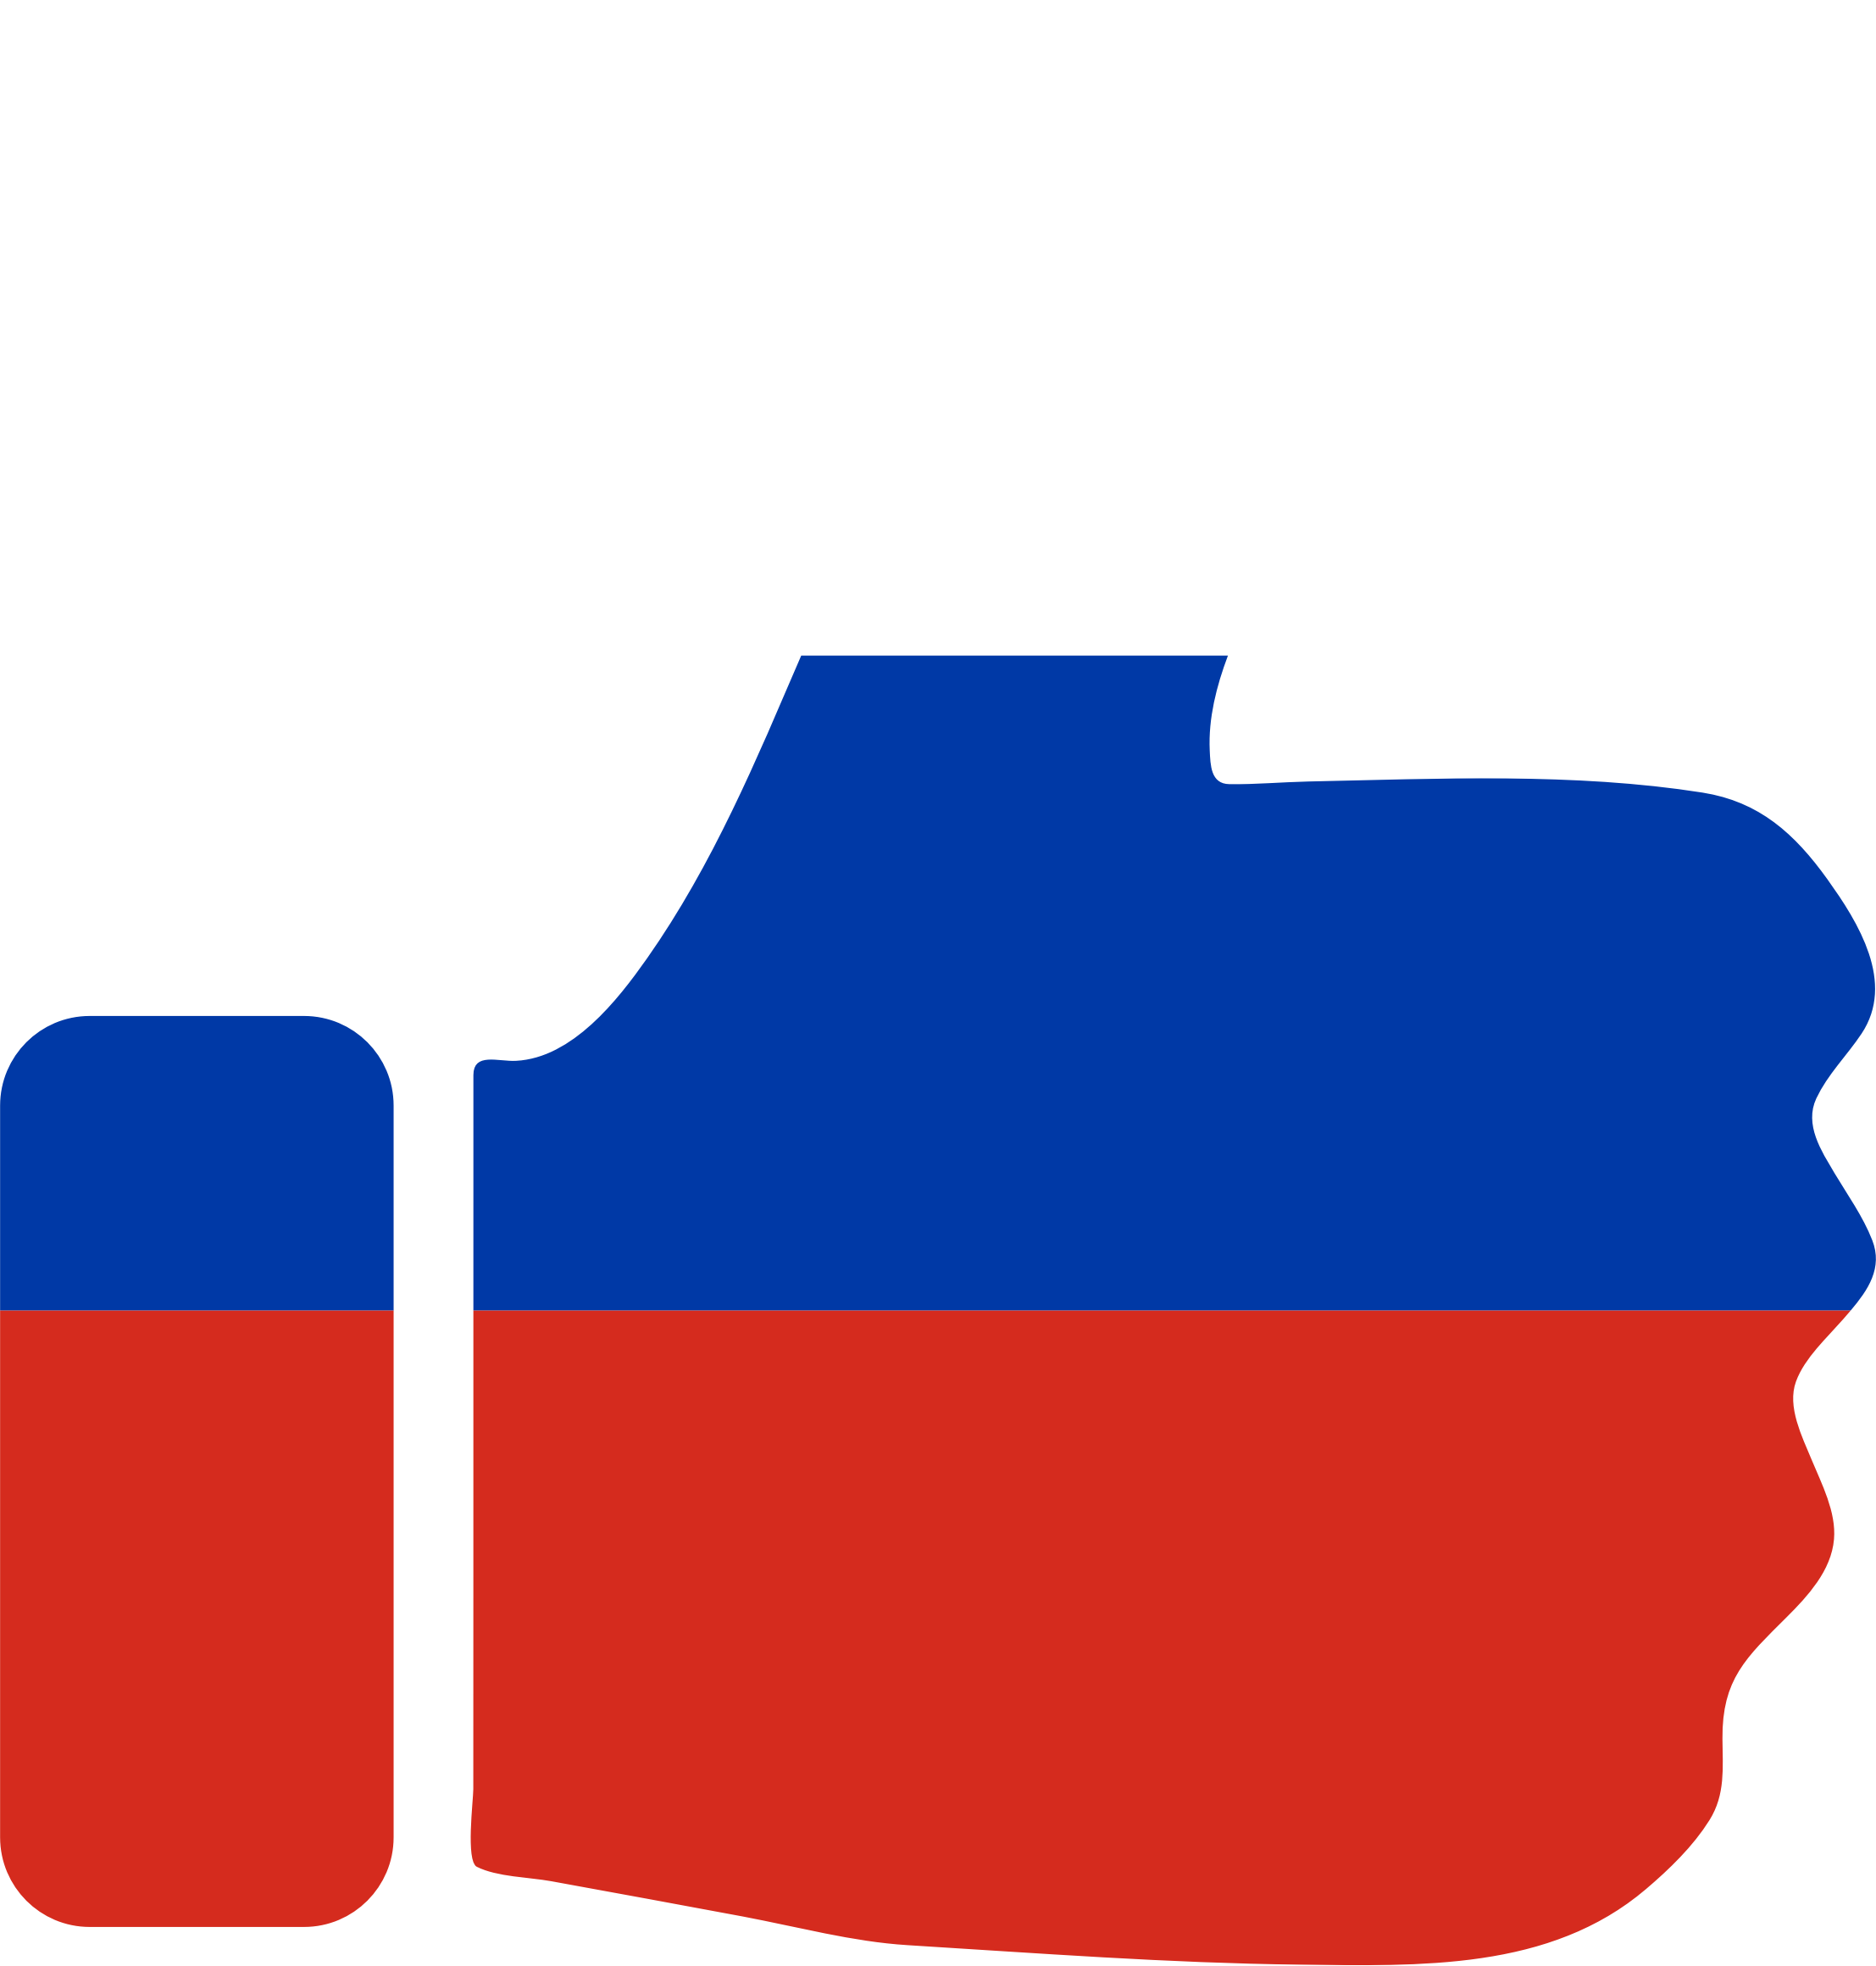 Big Image (Png) - Russia, Transparent background PNG HD thumbnail